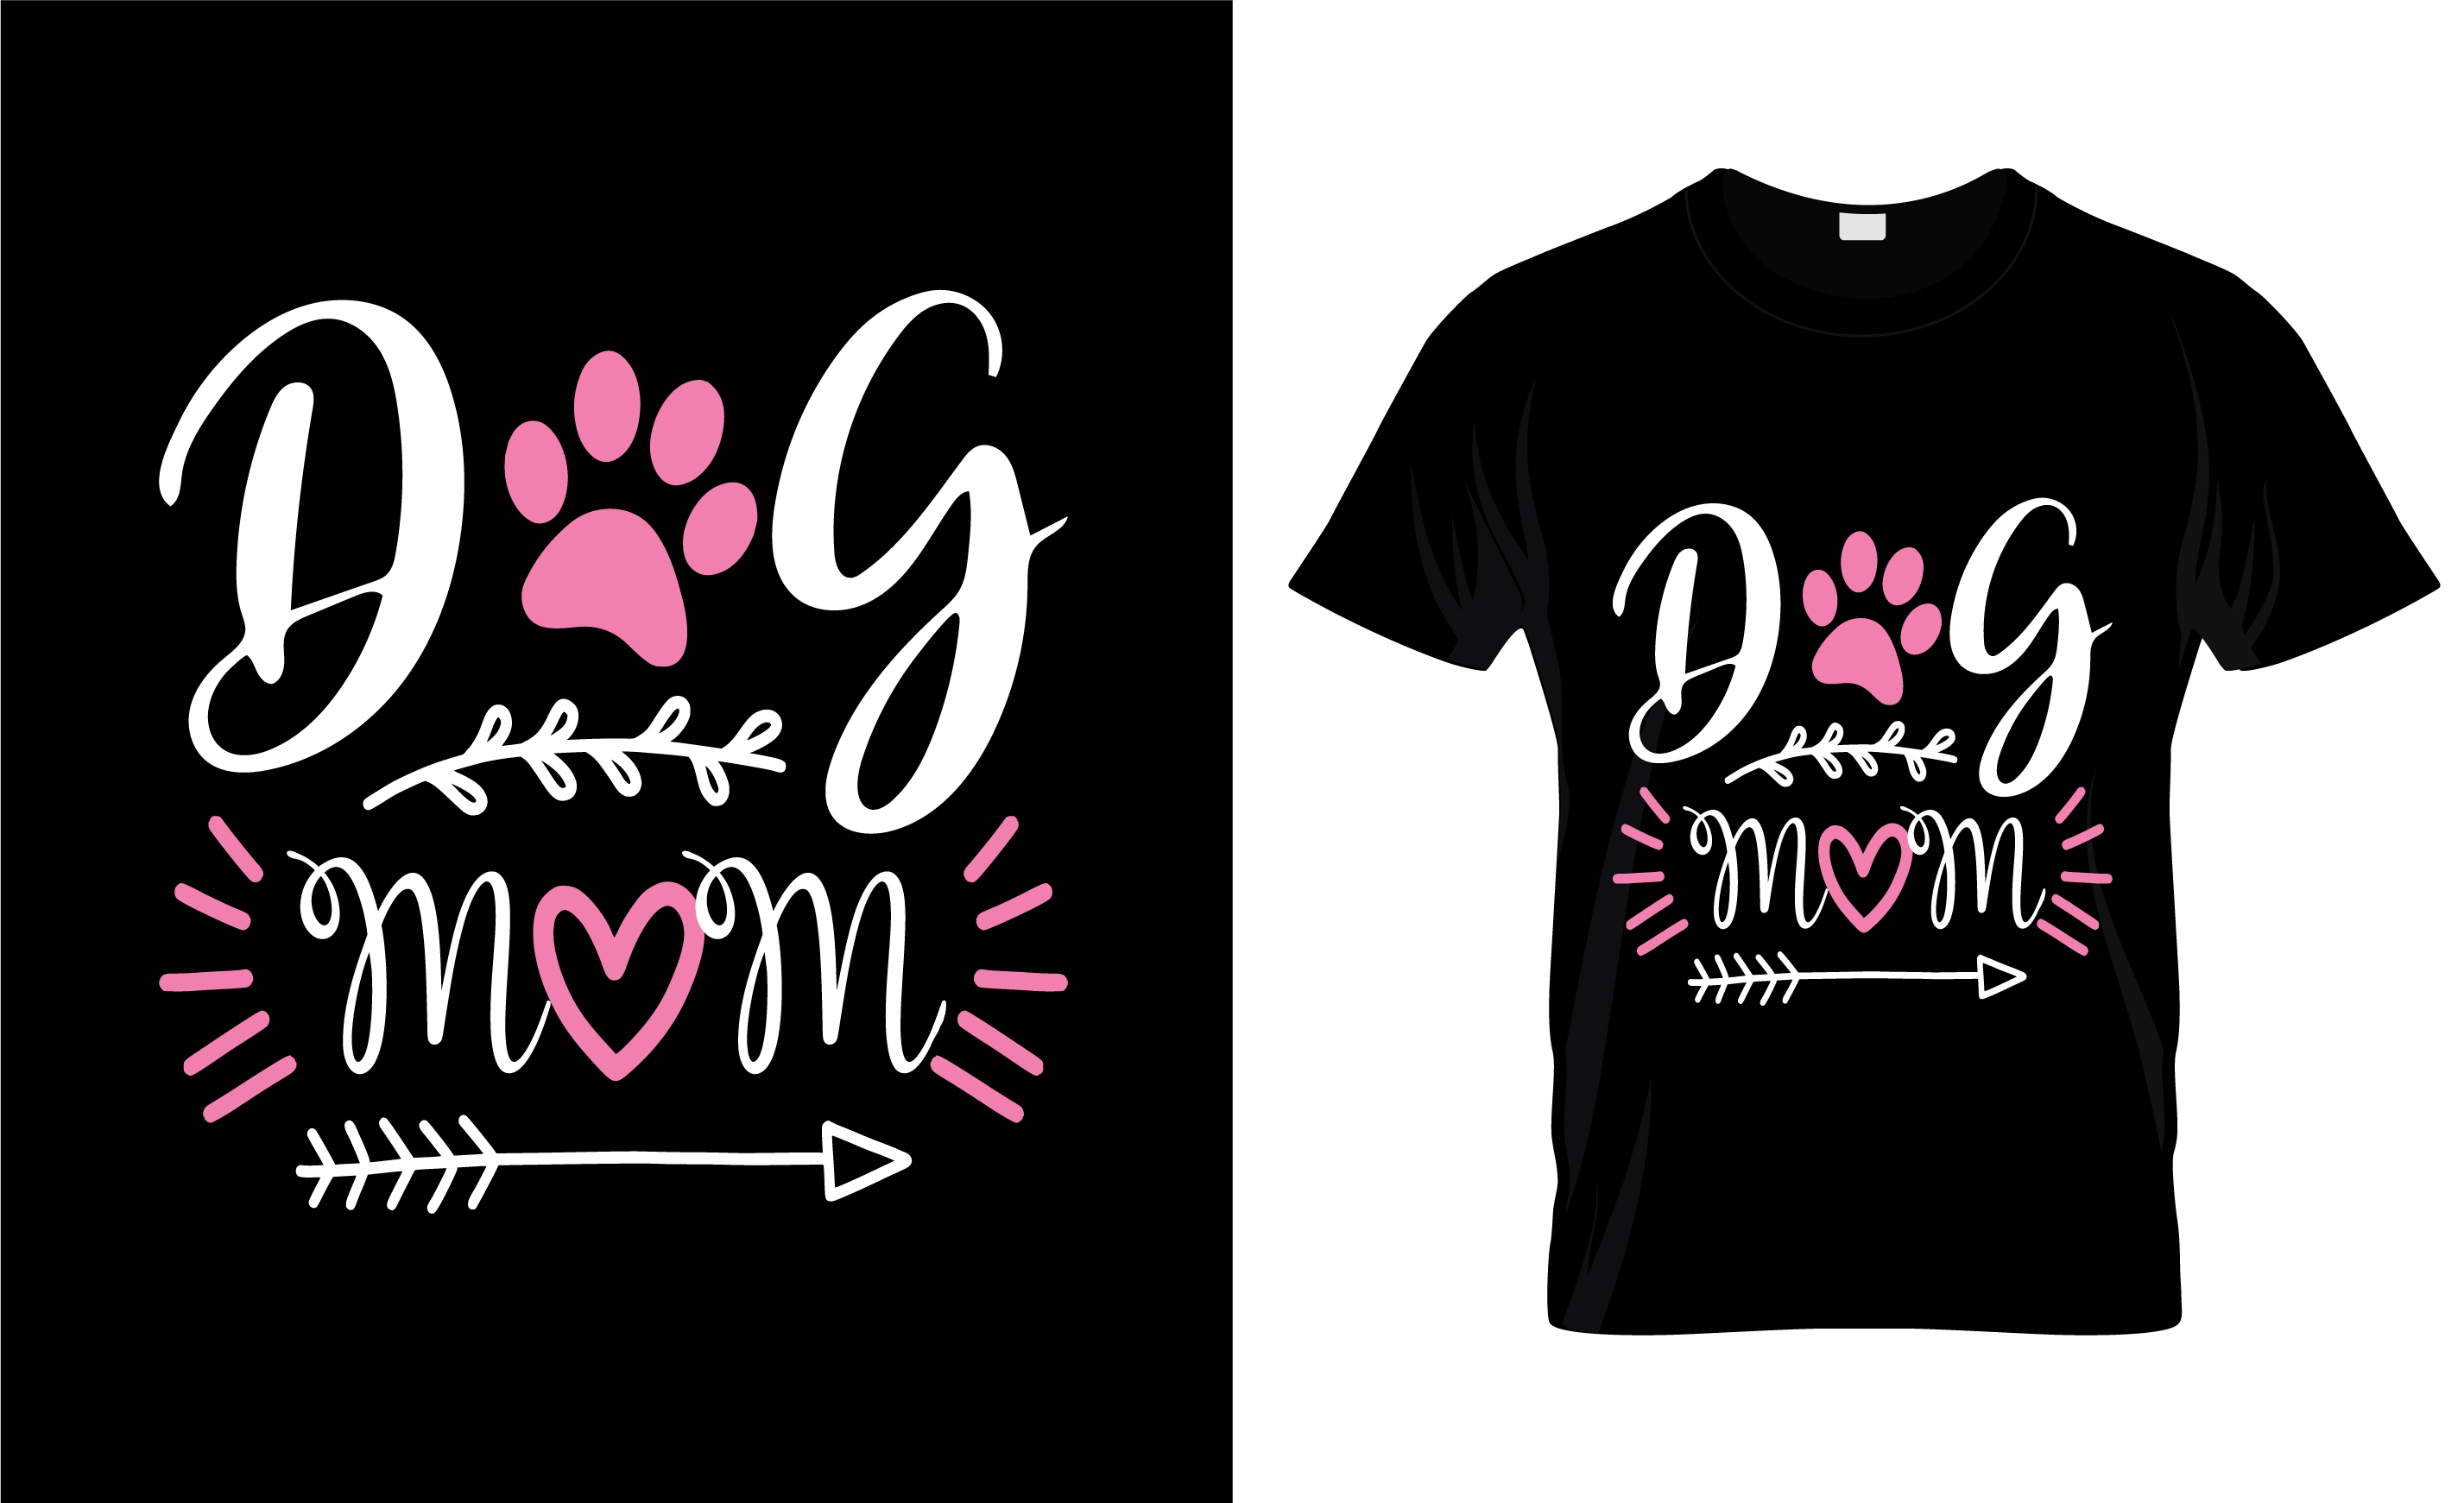 Image of a black T-shirt with an enchanting print, white and pink about mom.